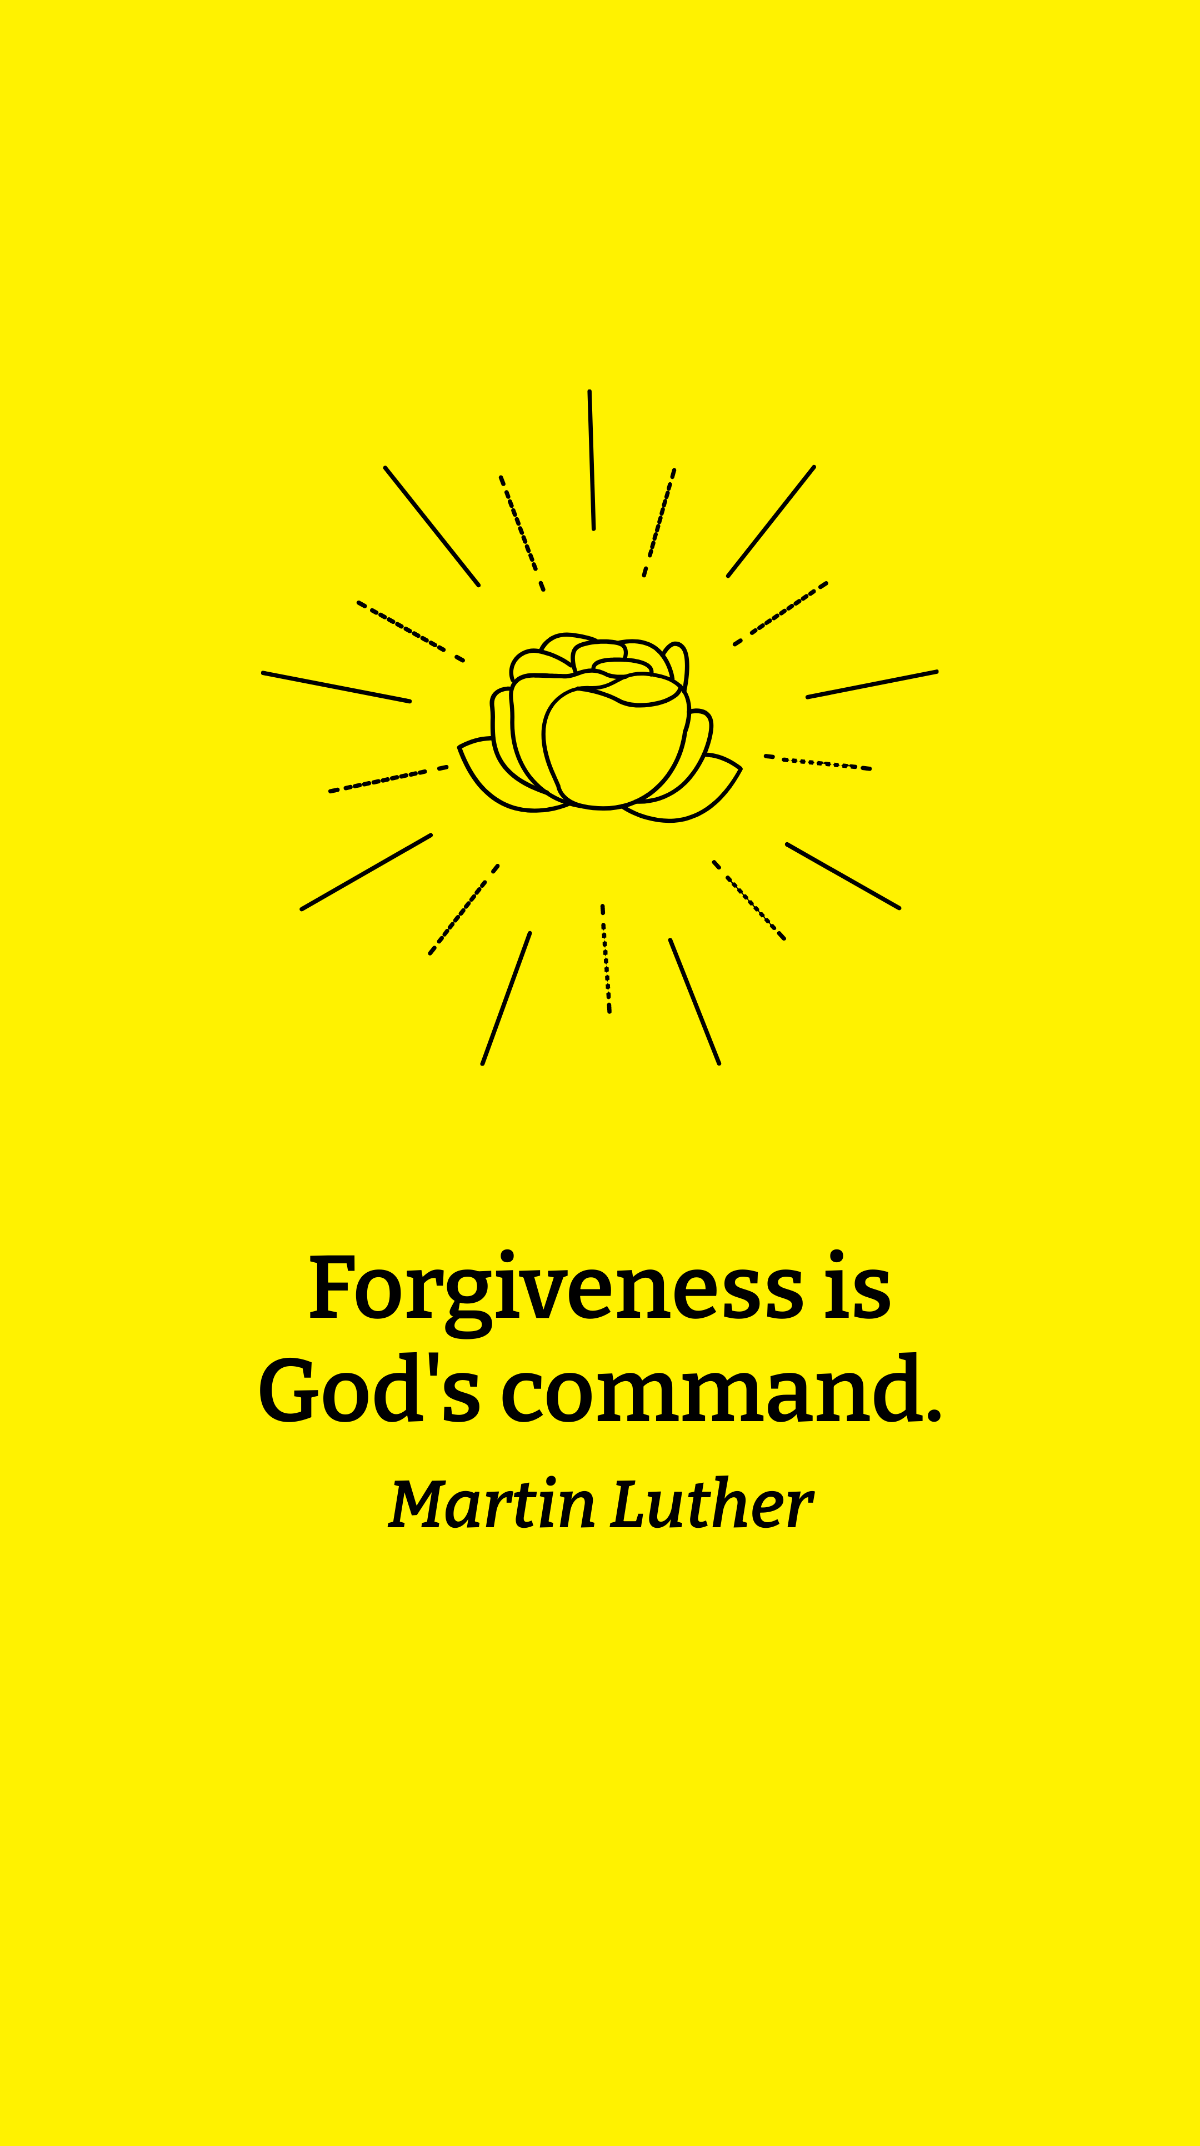 Free Martin Luther - Forgiveness is God's command. Template